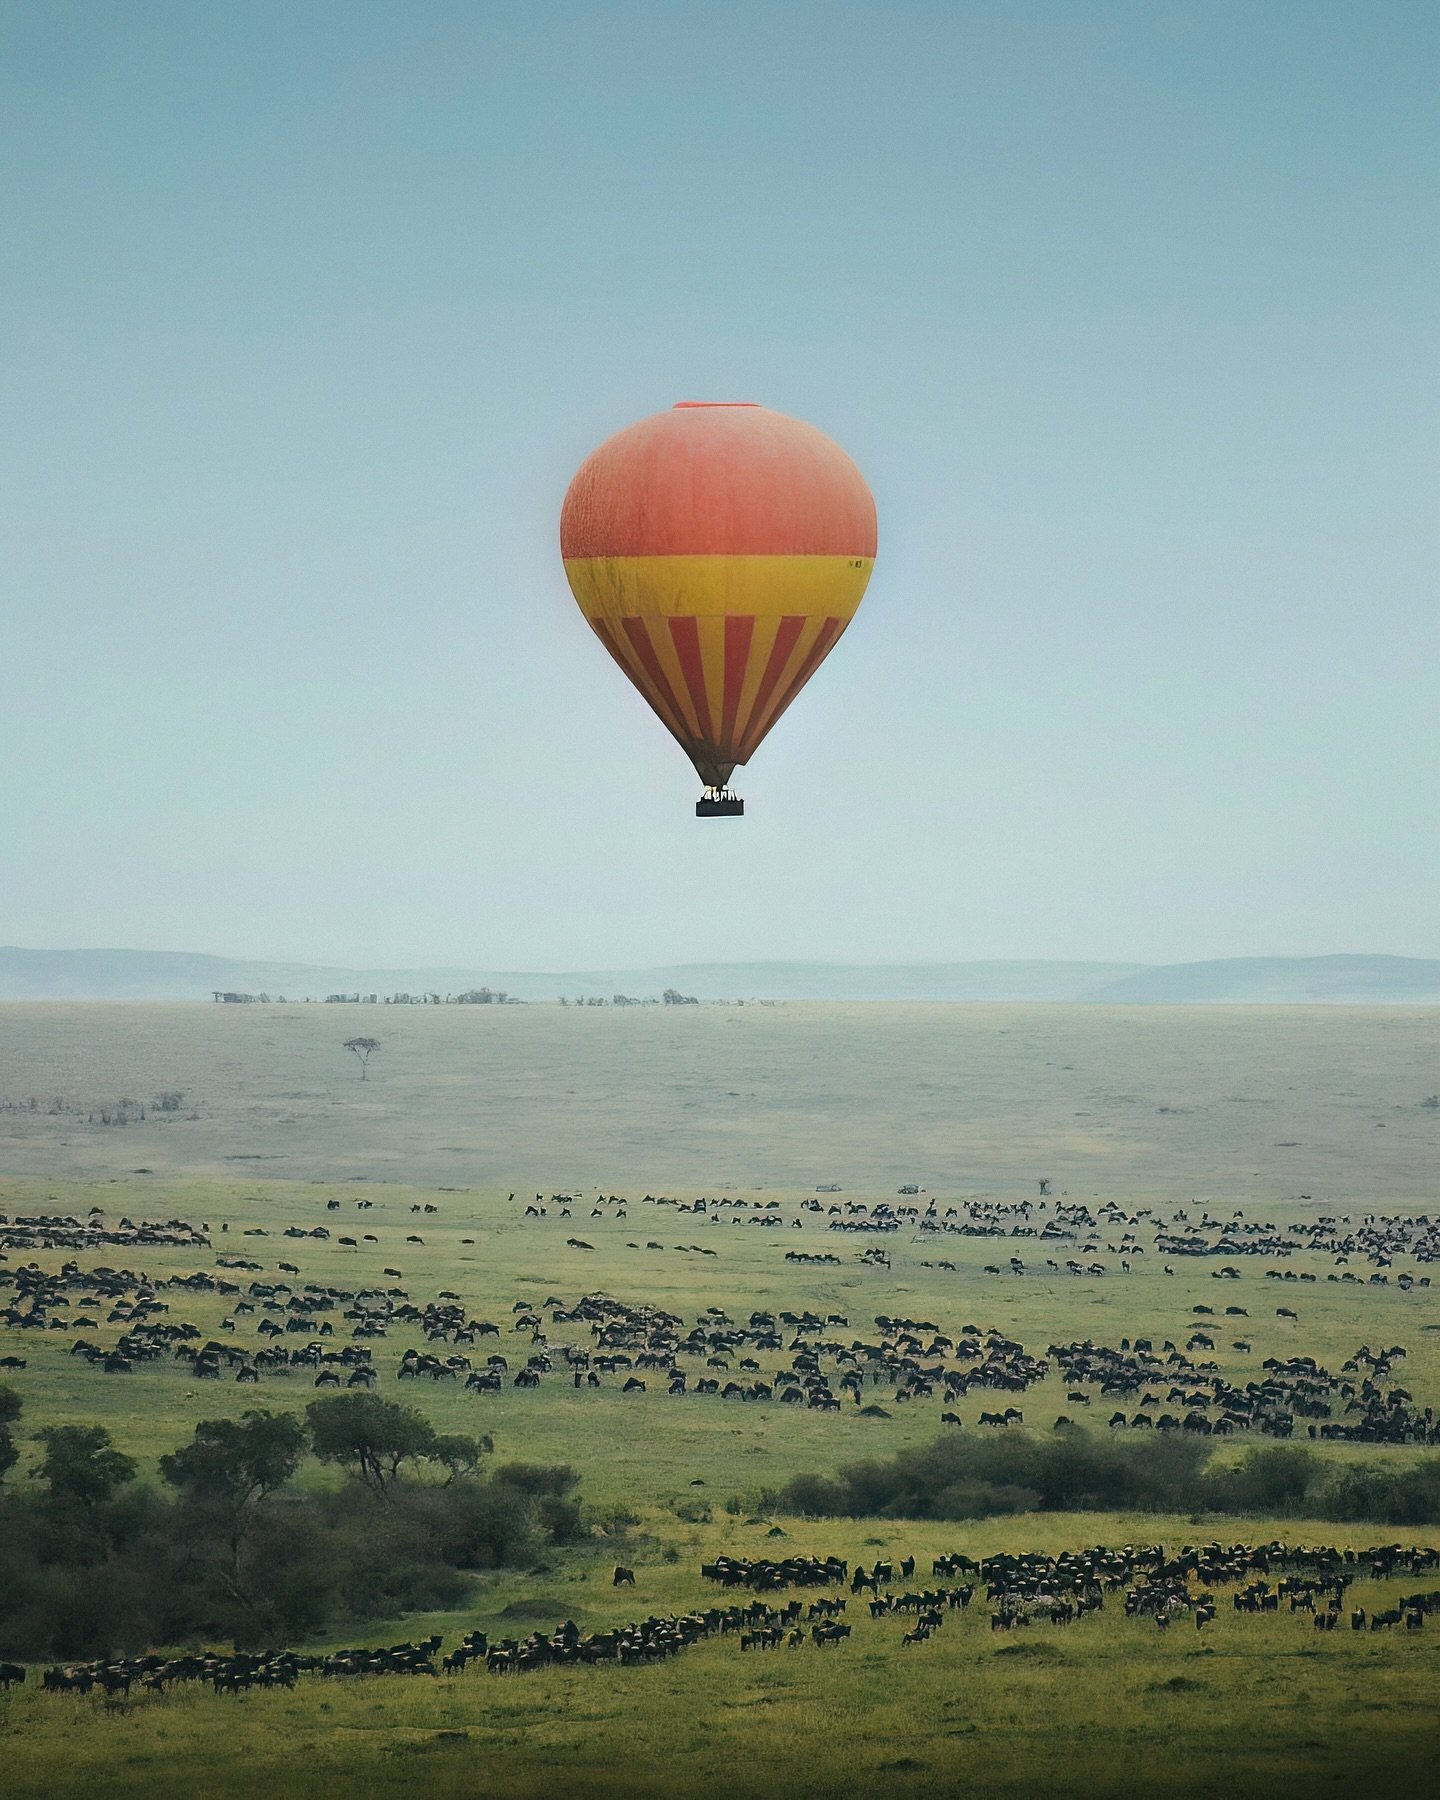 One from the archive &mdash; hot air balloon over the wildebeest migration in 2017 ✨

A favourite memory captured on my very first beginner camera + kit lens, taken 3 years before learning the ins and outs of photography had even crossed my mind. It'